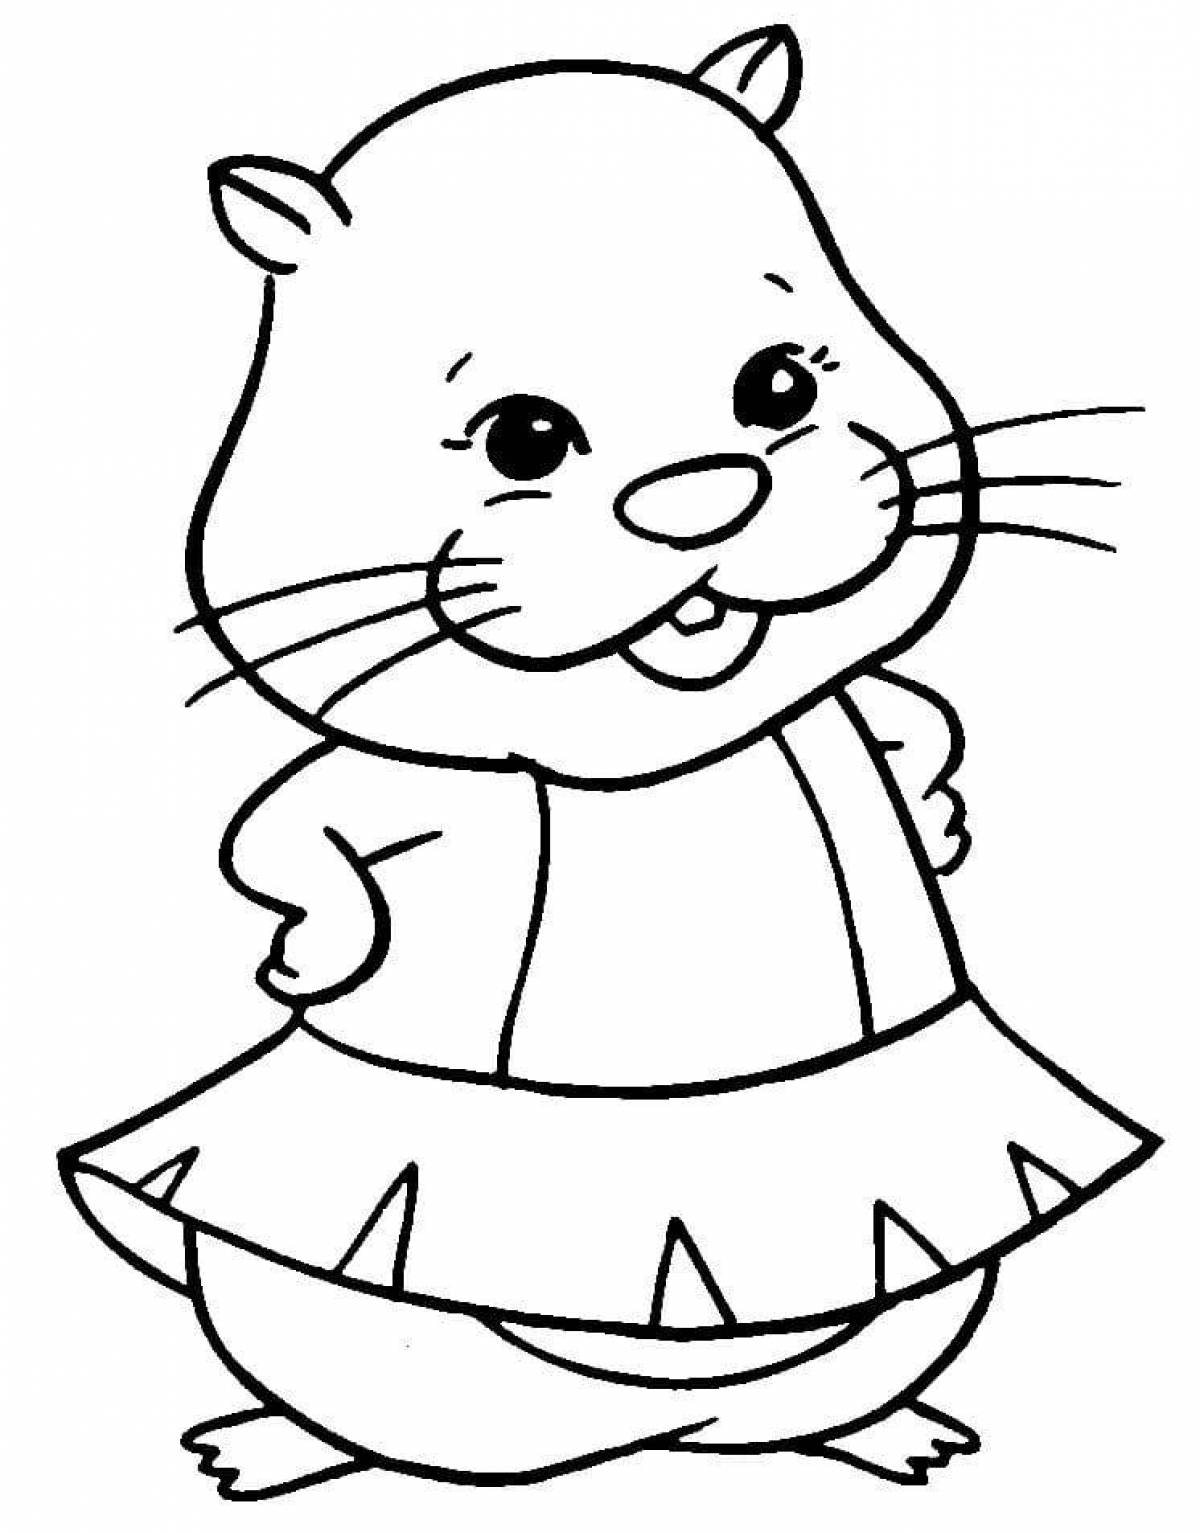 Coloring book funny hamster for kids